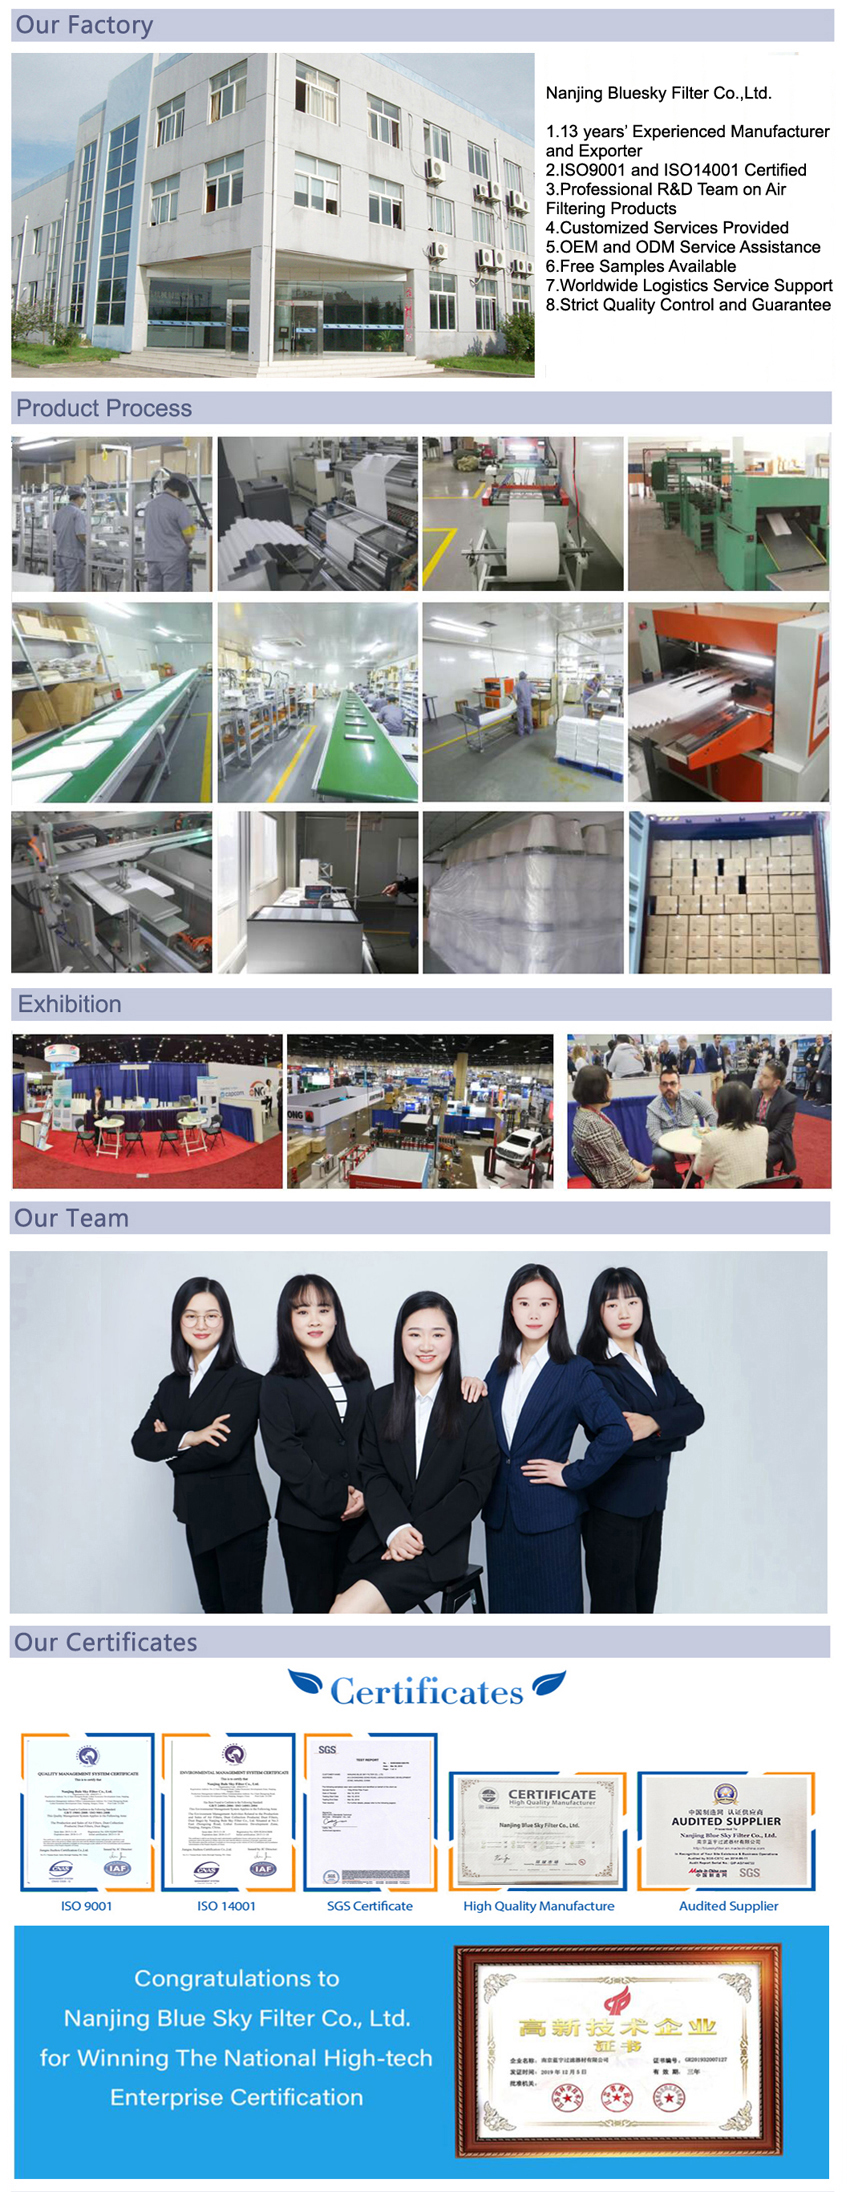 Our Company of Cylindrical Filter